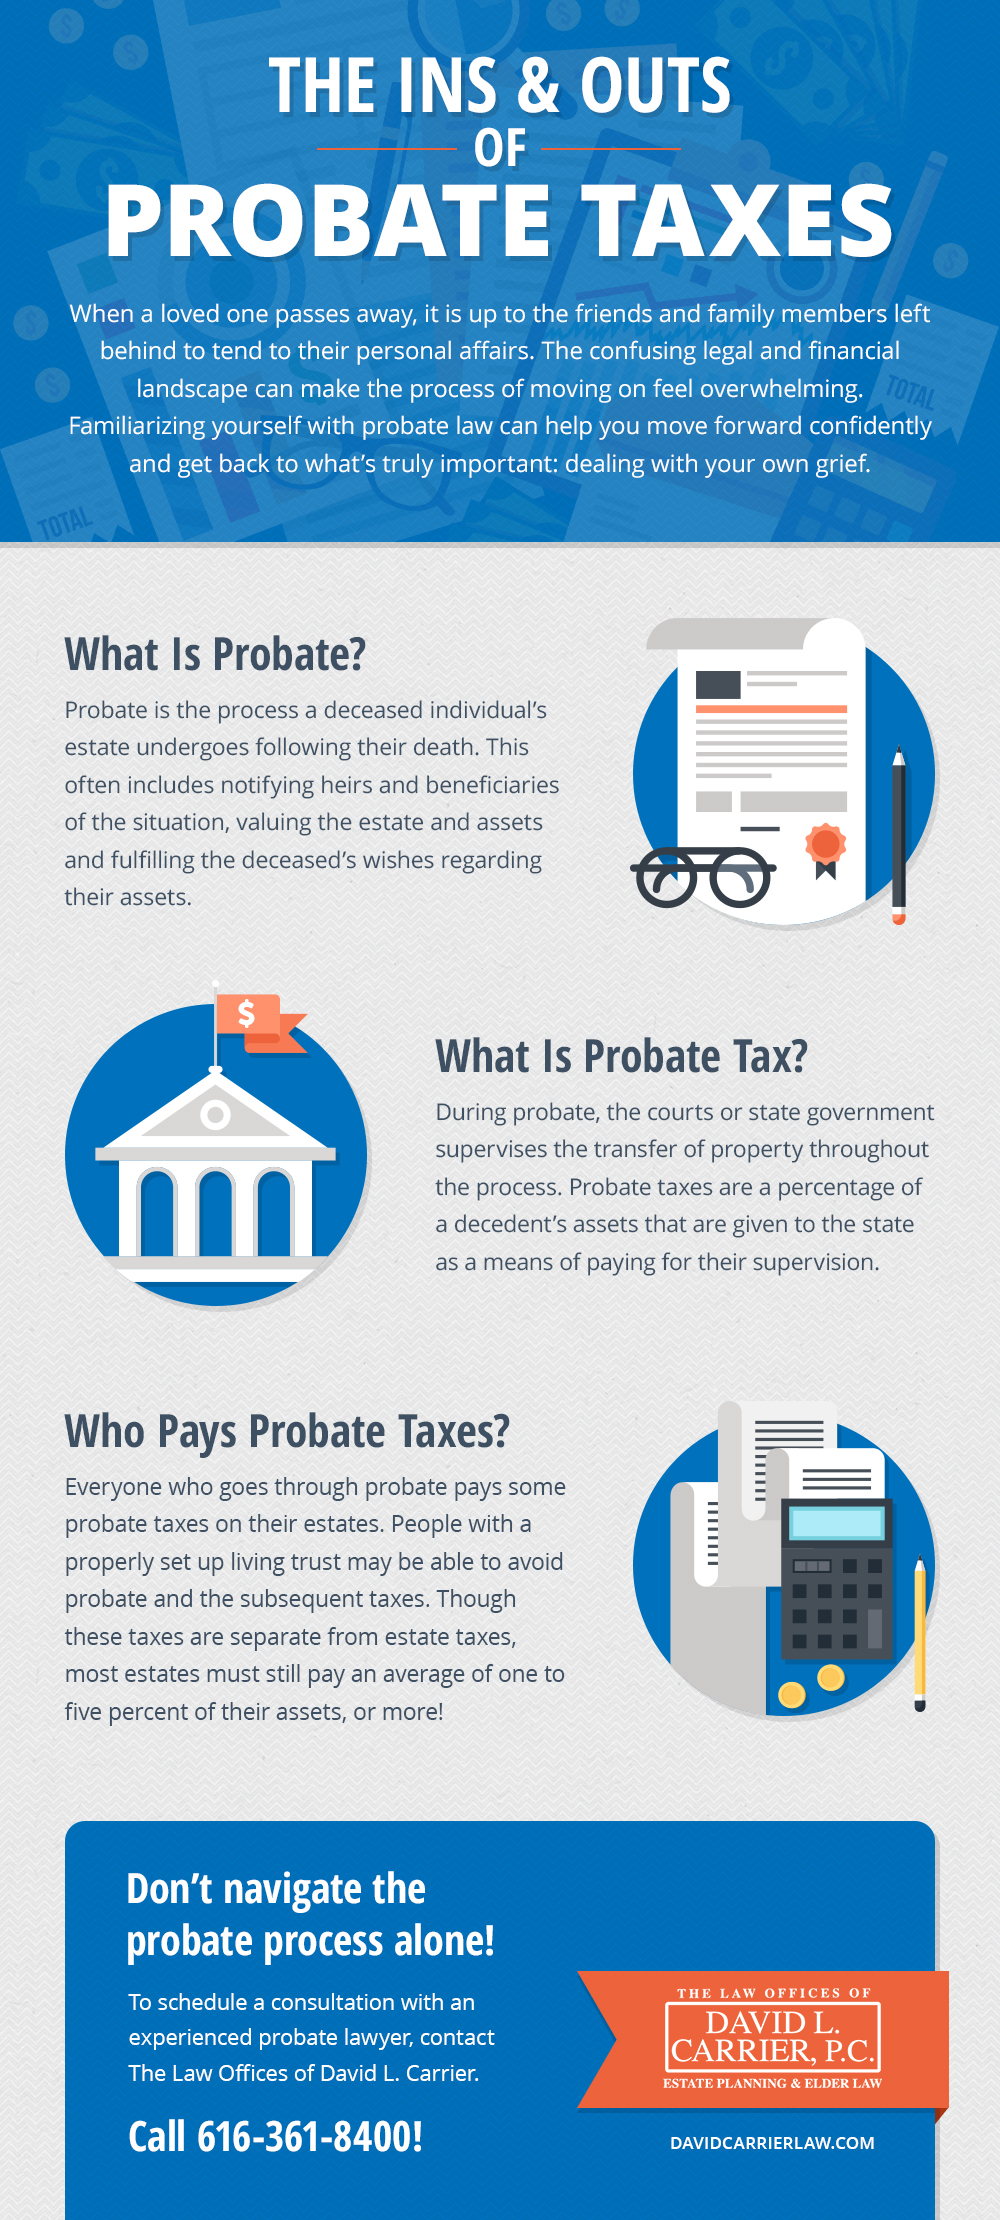 Learn more about probate taxes in Michigan | The Law Offices of David L Carrier